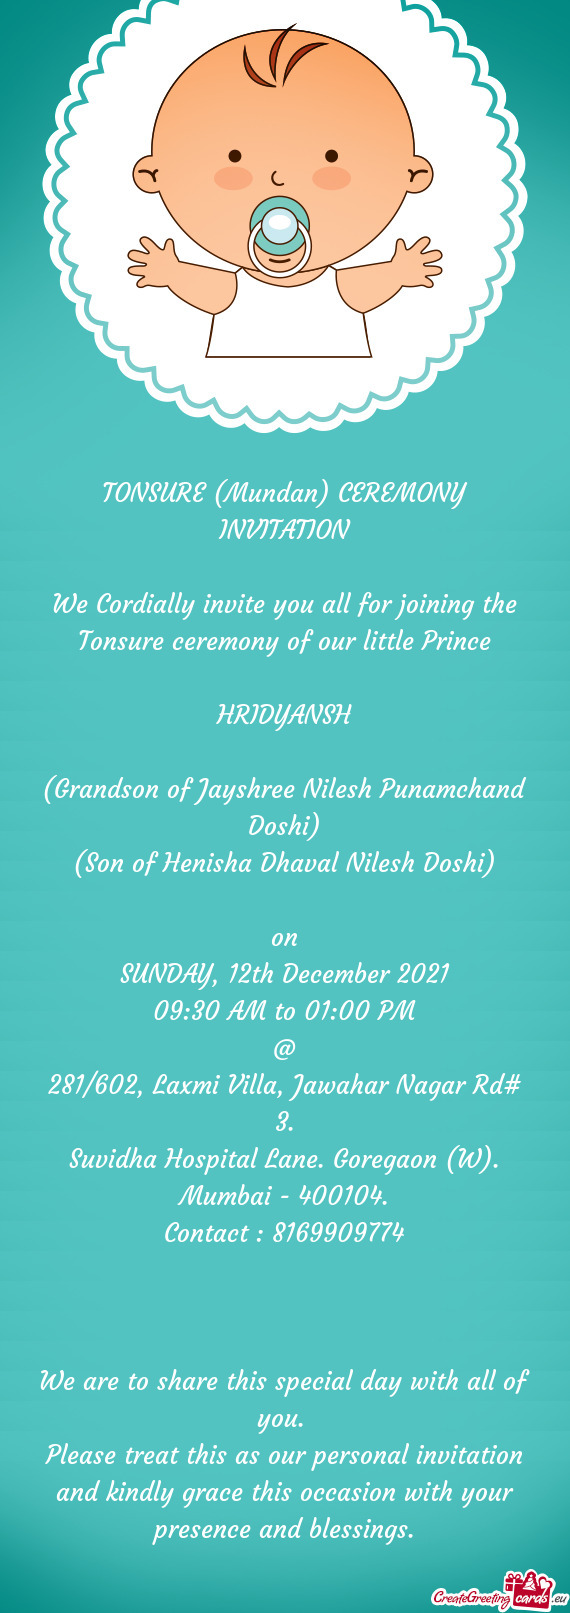 We Cordially invite you all for joining the Tonsure ceremony of our little Prince